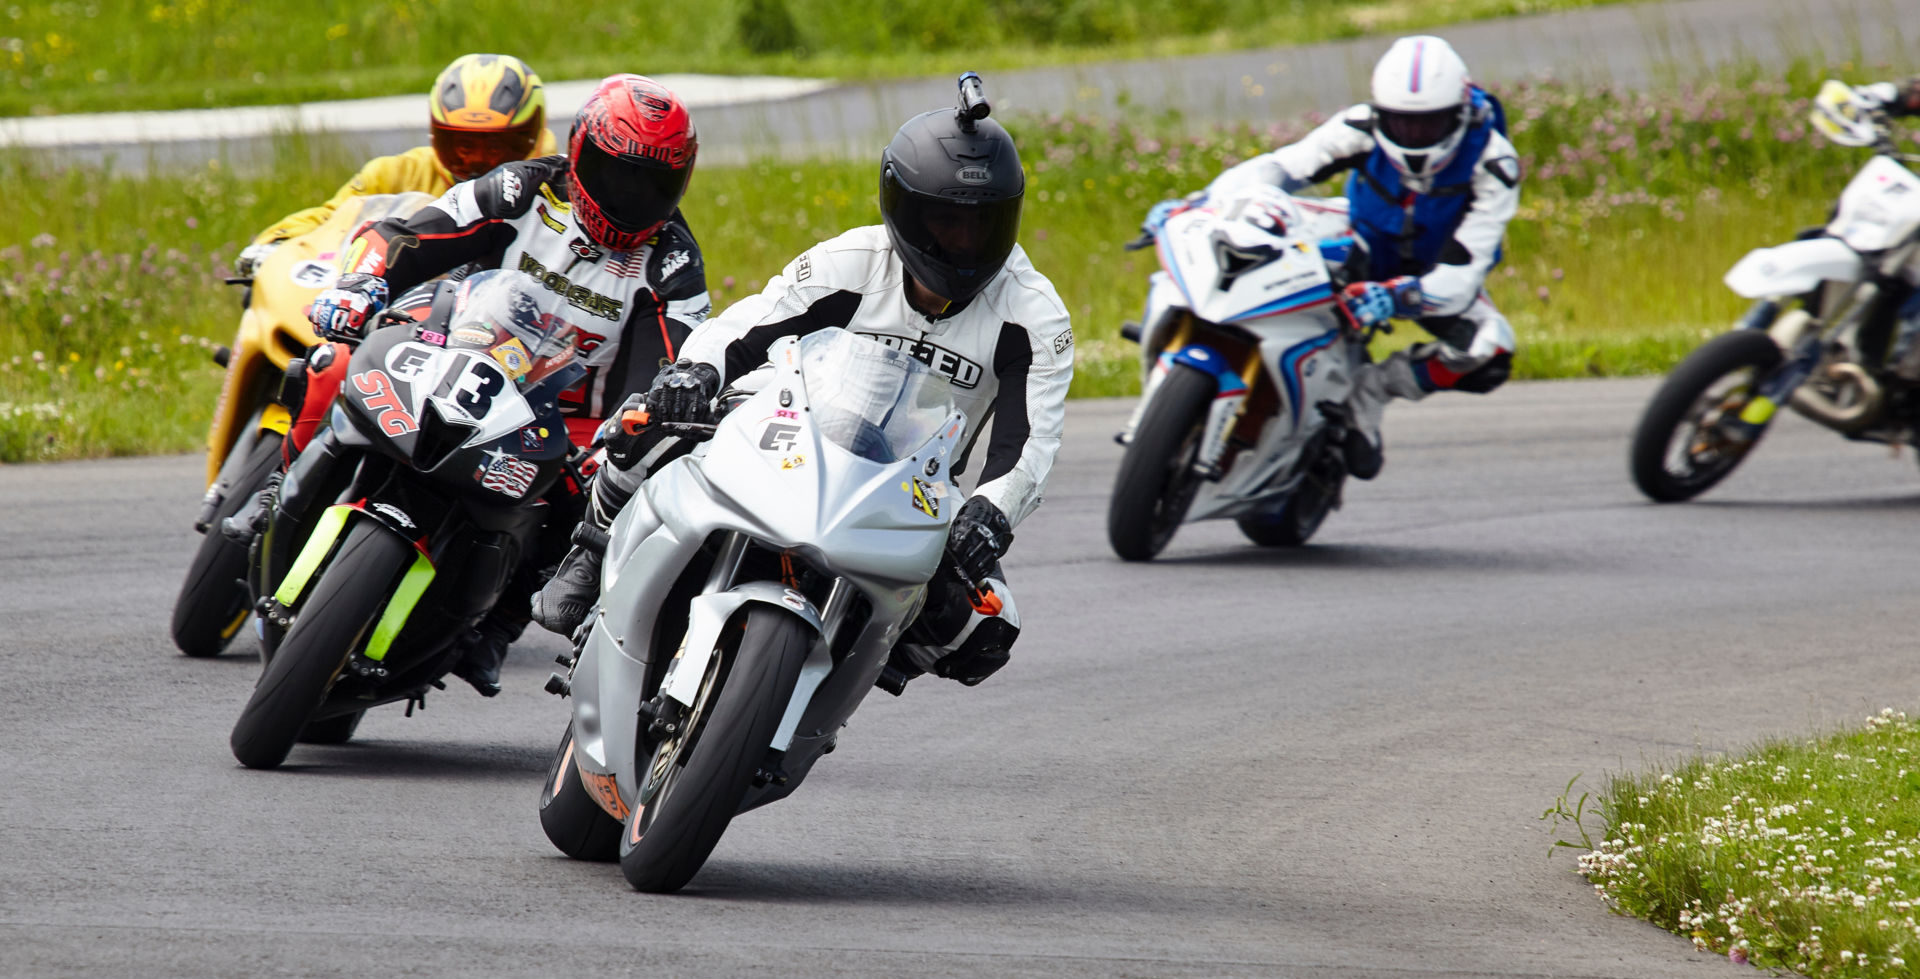 Motorcyclists at speed during a track day at Pineview Run Auto & Country Club. Photo courtesy of Pineview Run Auto & Country Club.